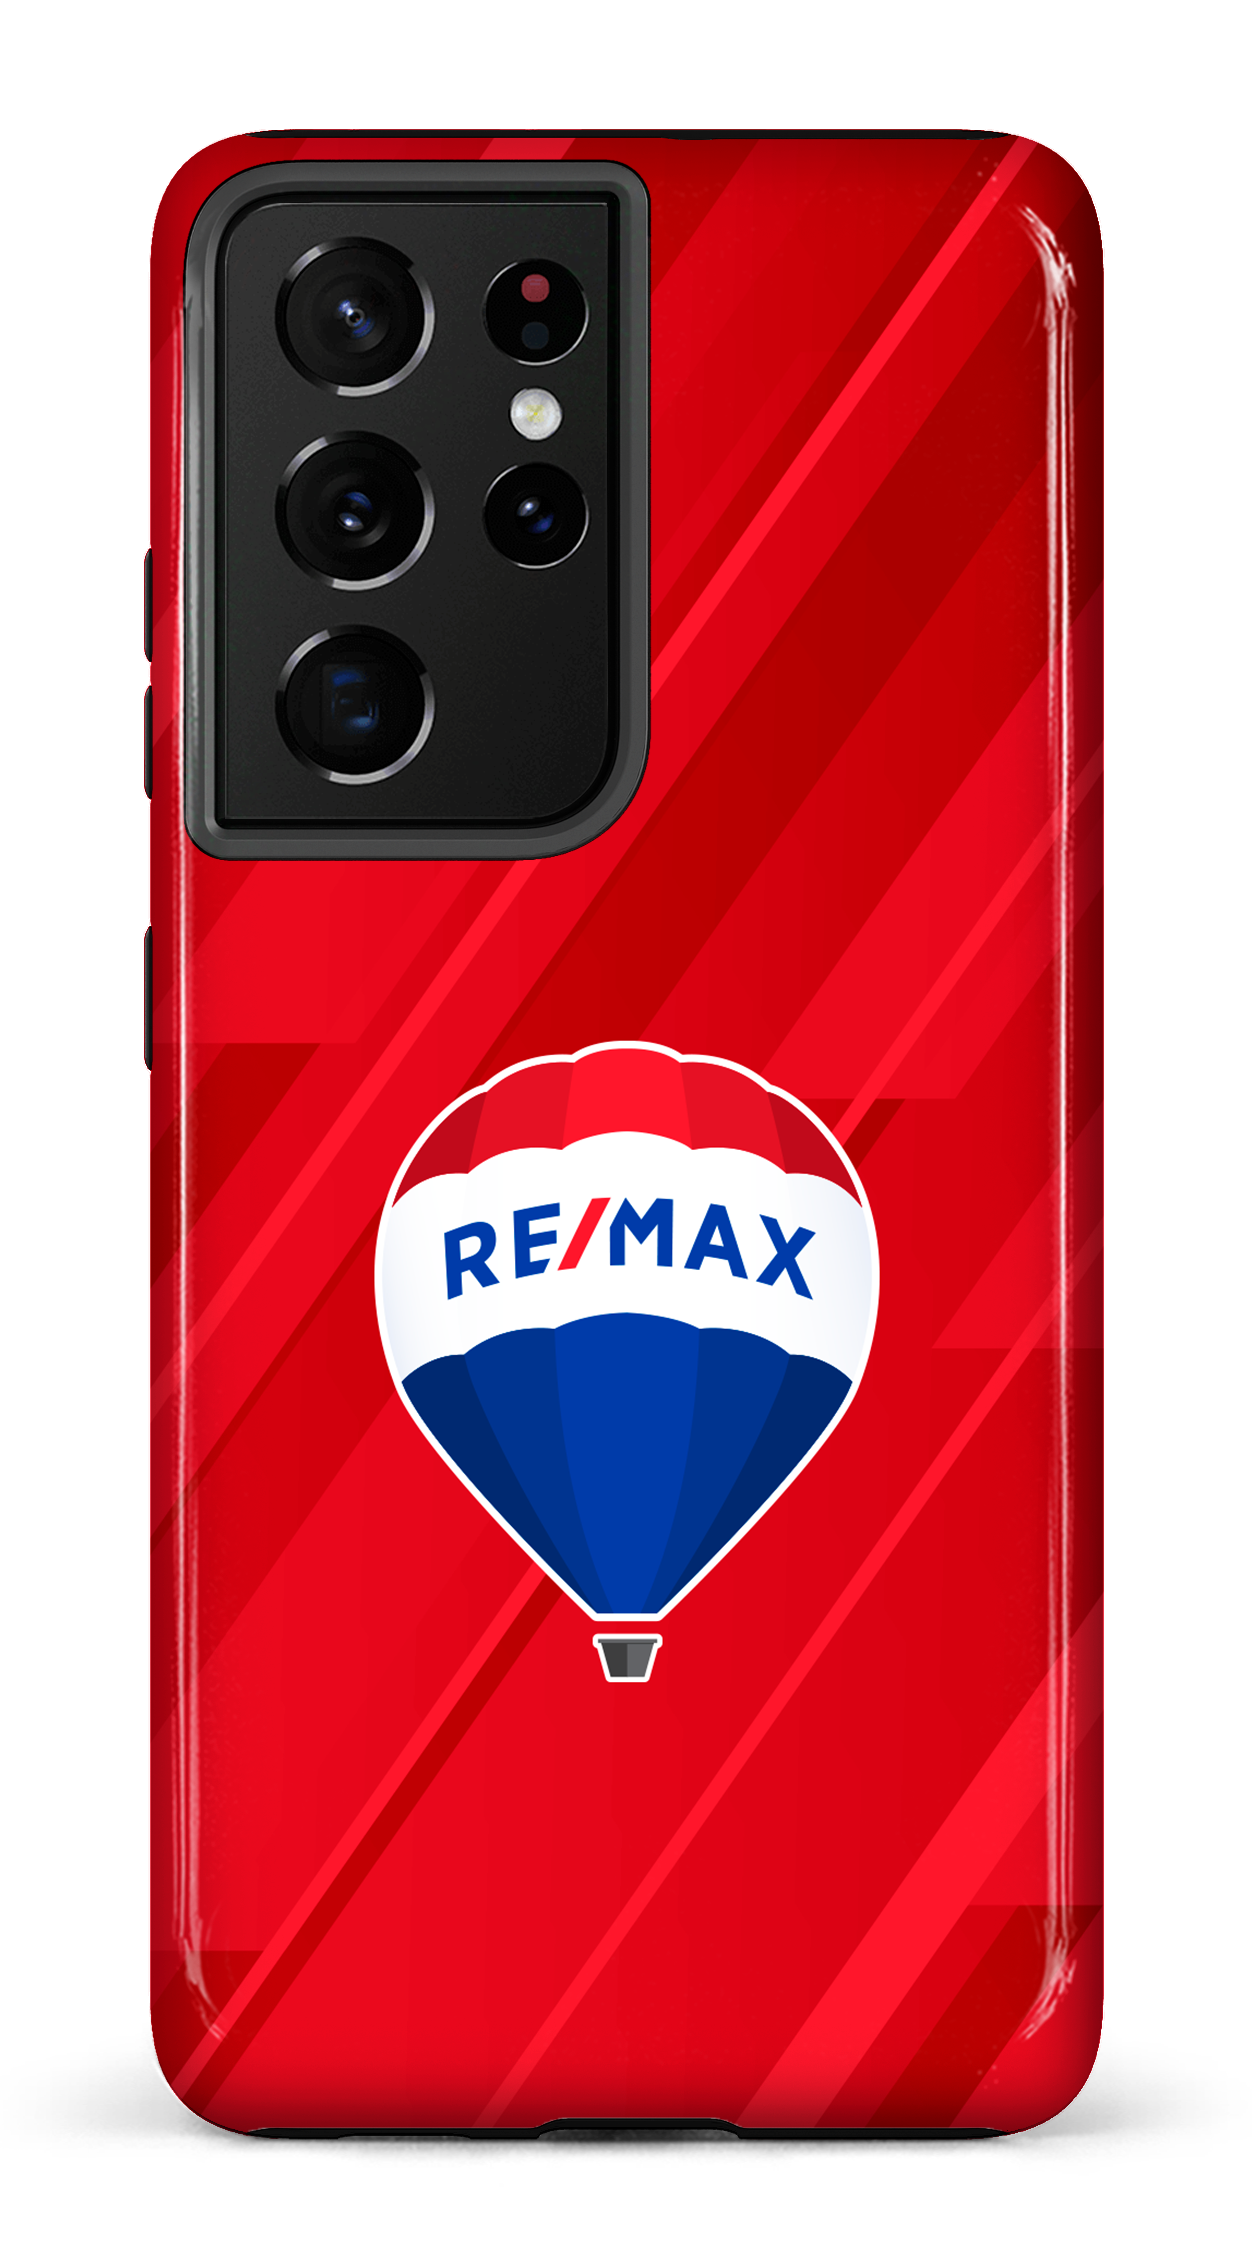 Remax Rouge - Galaxy S21 Ultra